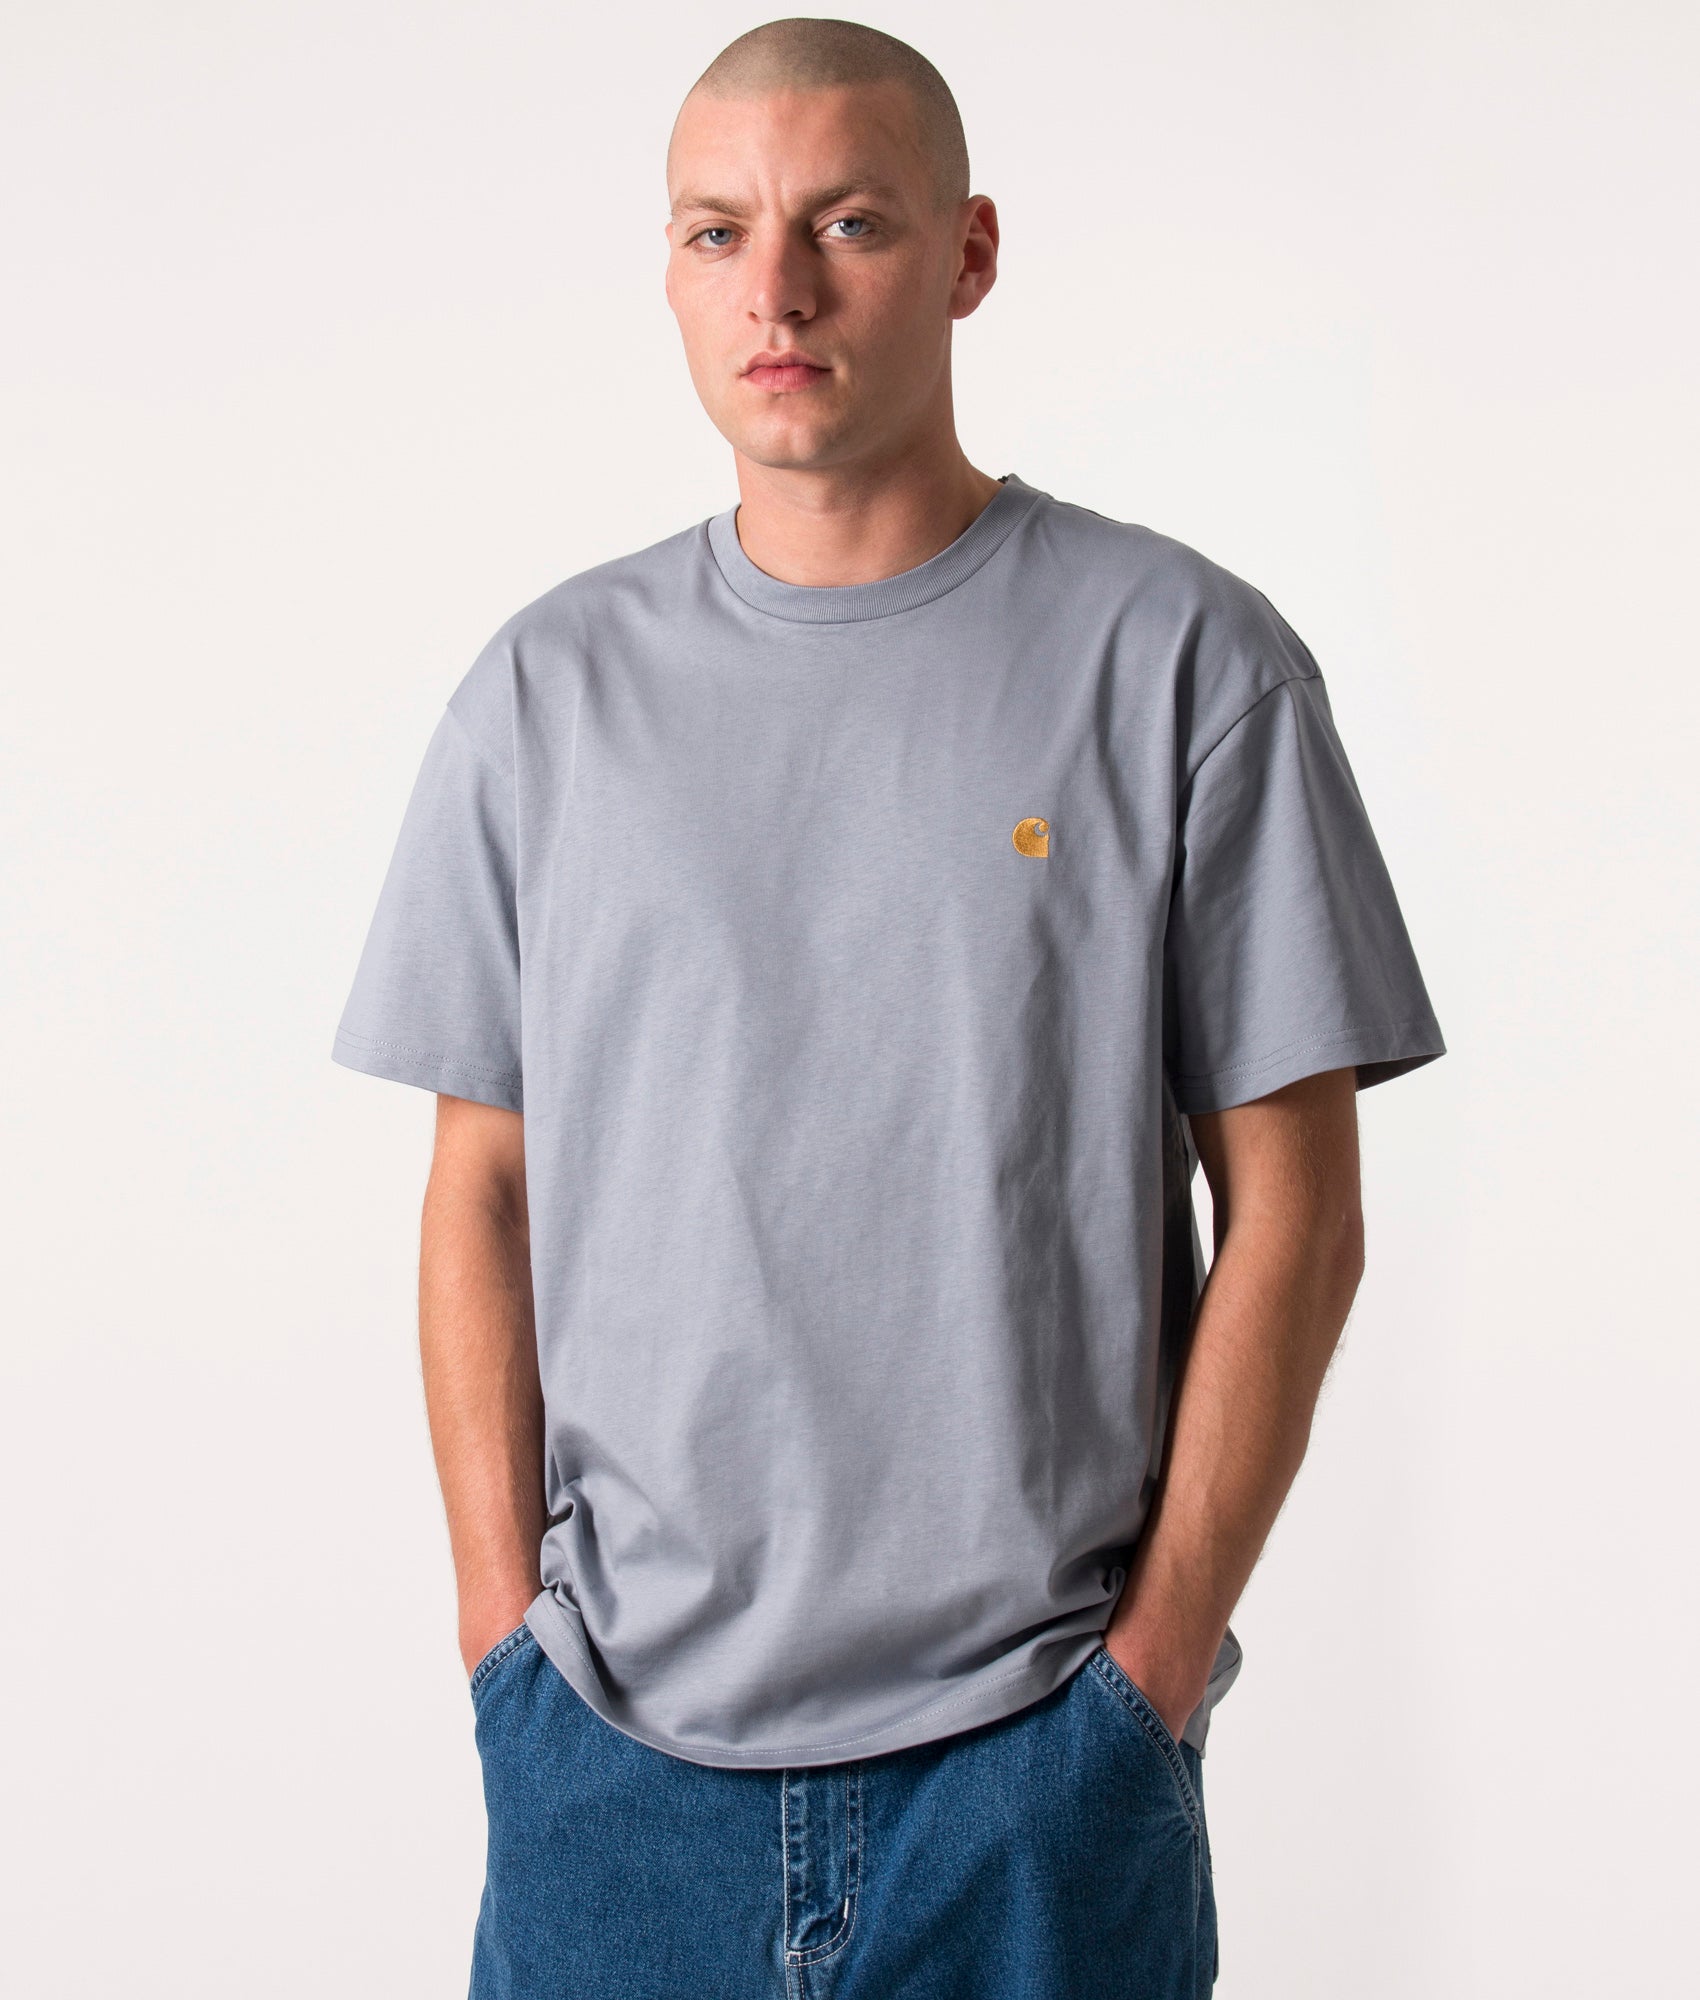 Carhartt WIP Mens Relaxed Fit Chase T-Shirt - Colour: 1R2XX Mirror/Gold - Size: Small